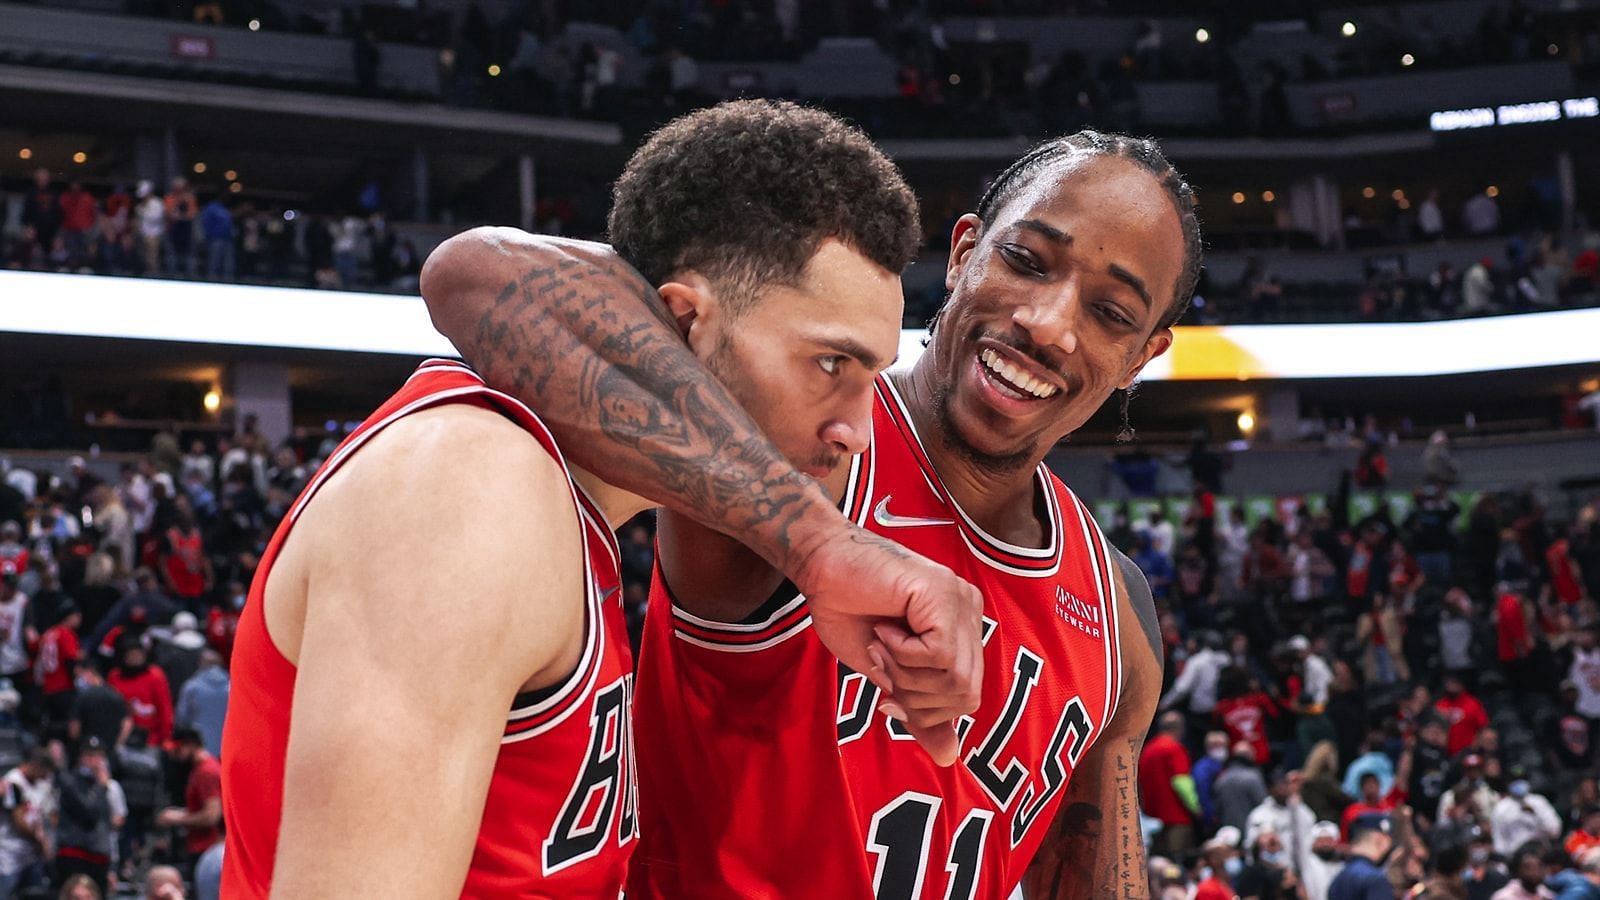 Zach LaVine will carry more of the scoring burden for the Chicago Bulls without DeMar DeRozan against the Cleveland Cavaliers. [Photo: NBA.com]